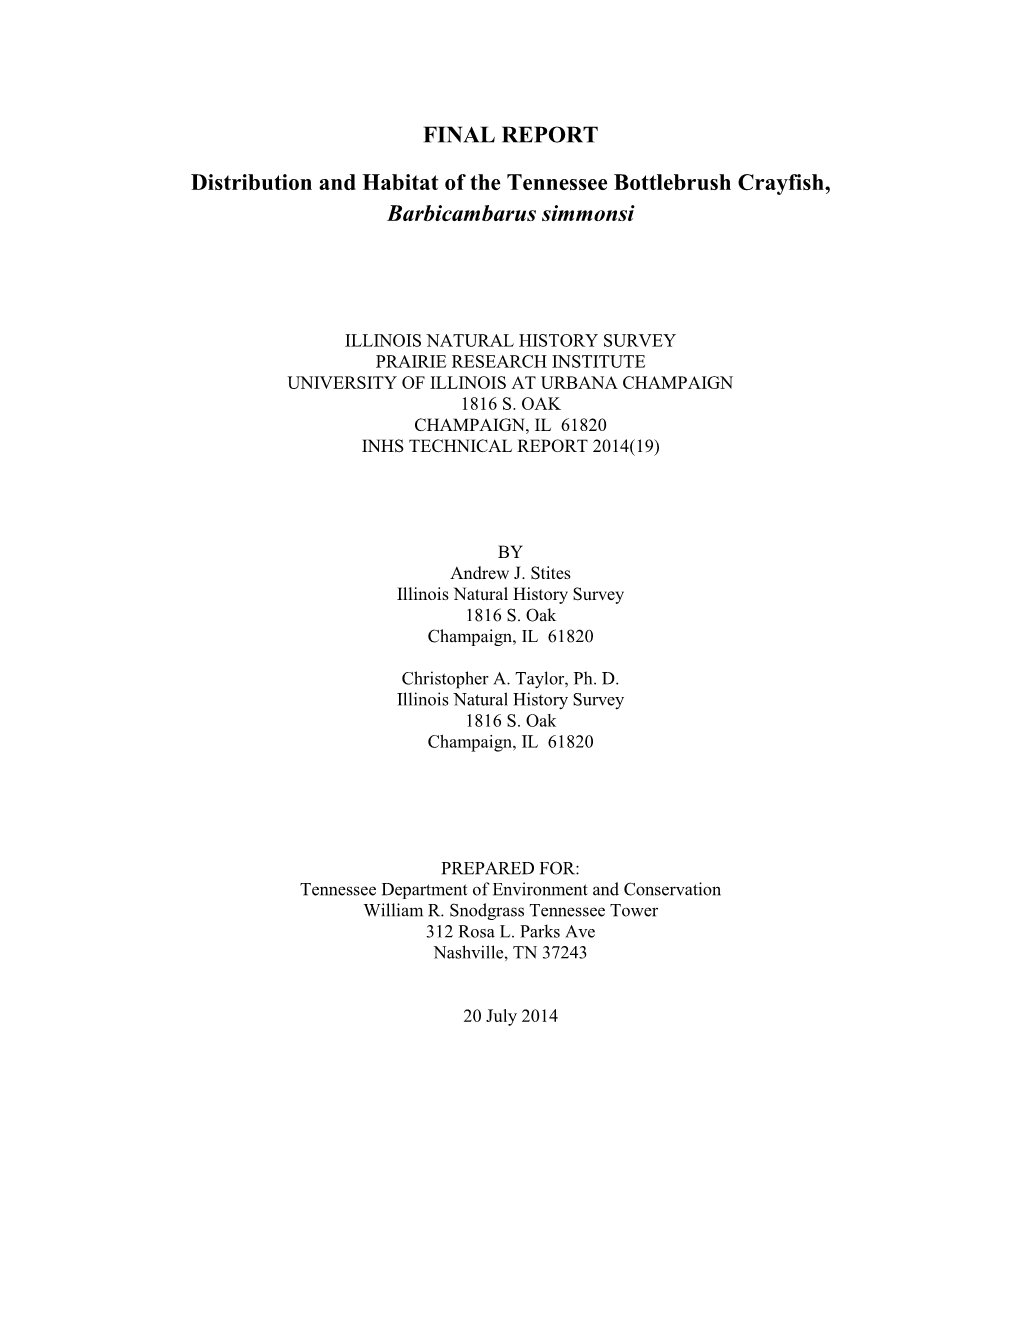 FINAL REPORT Distribution and Habitat of the Tennessee